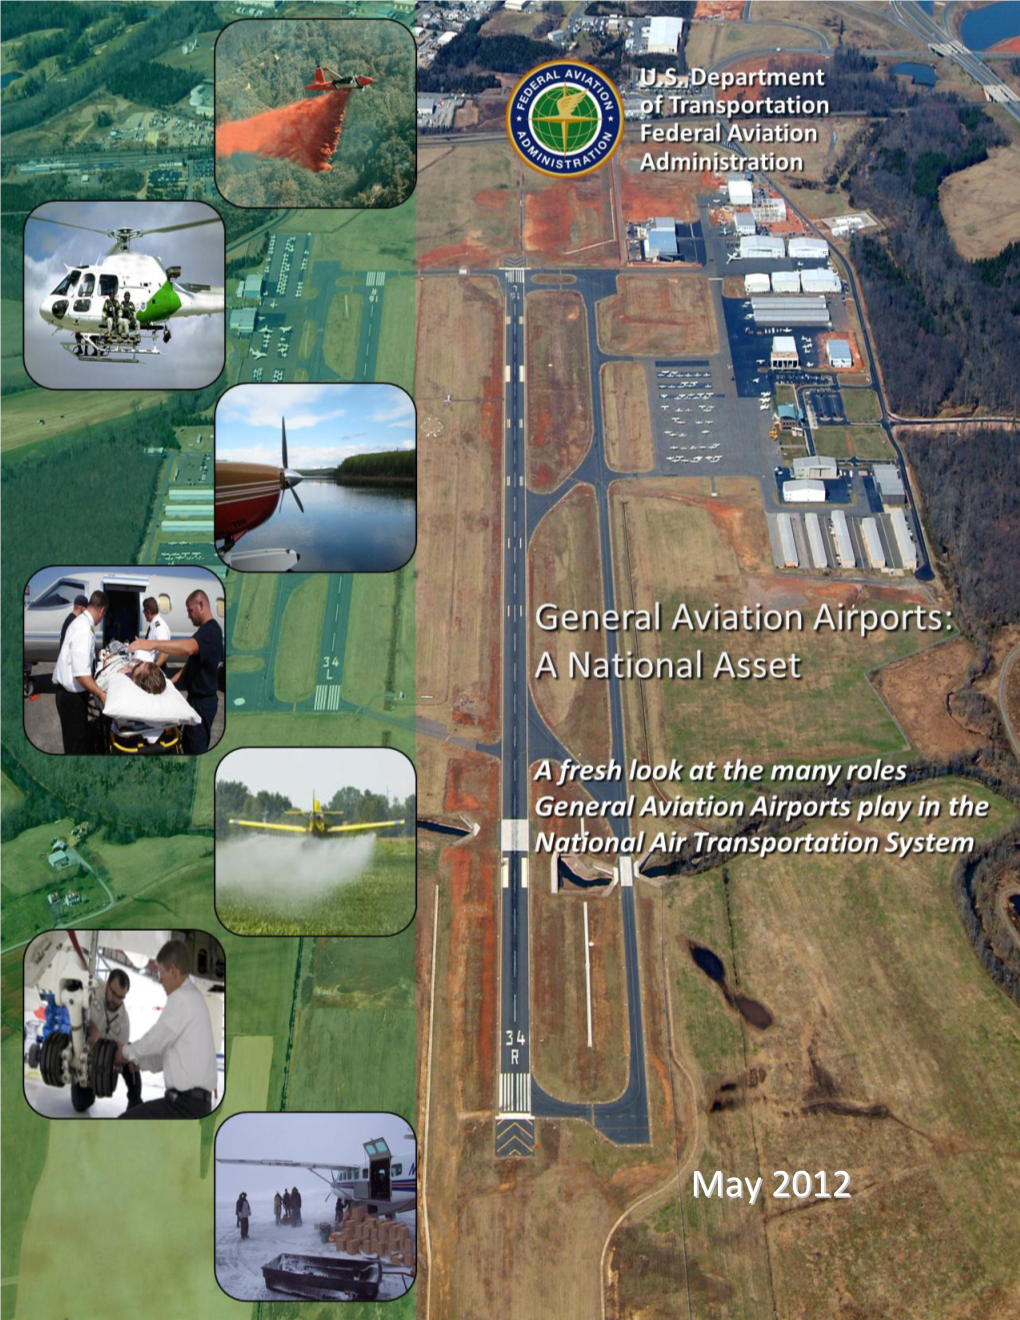 General Aviation Airports: a National Asset (May 2012)